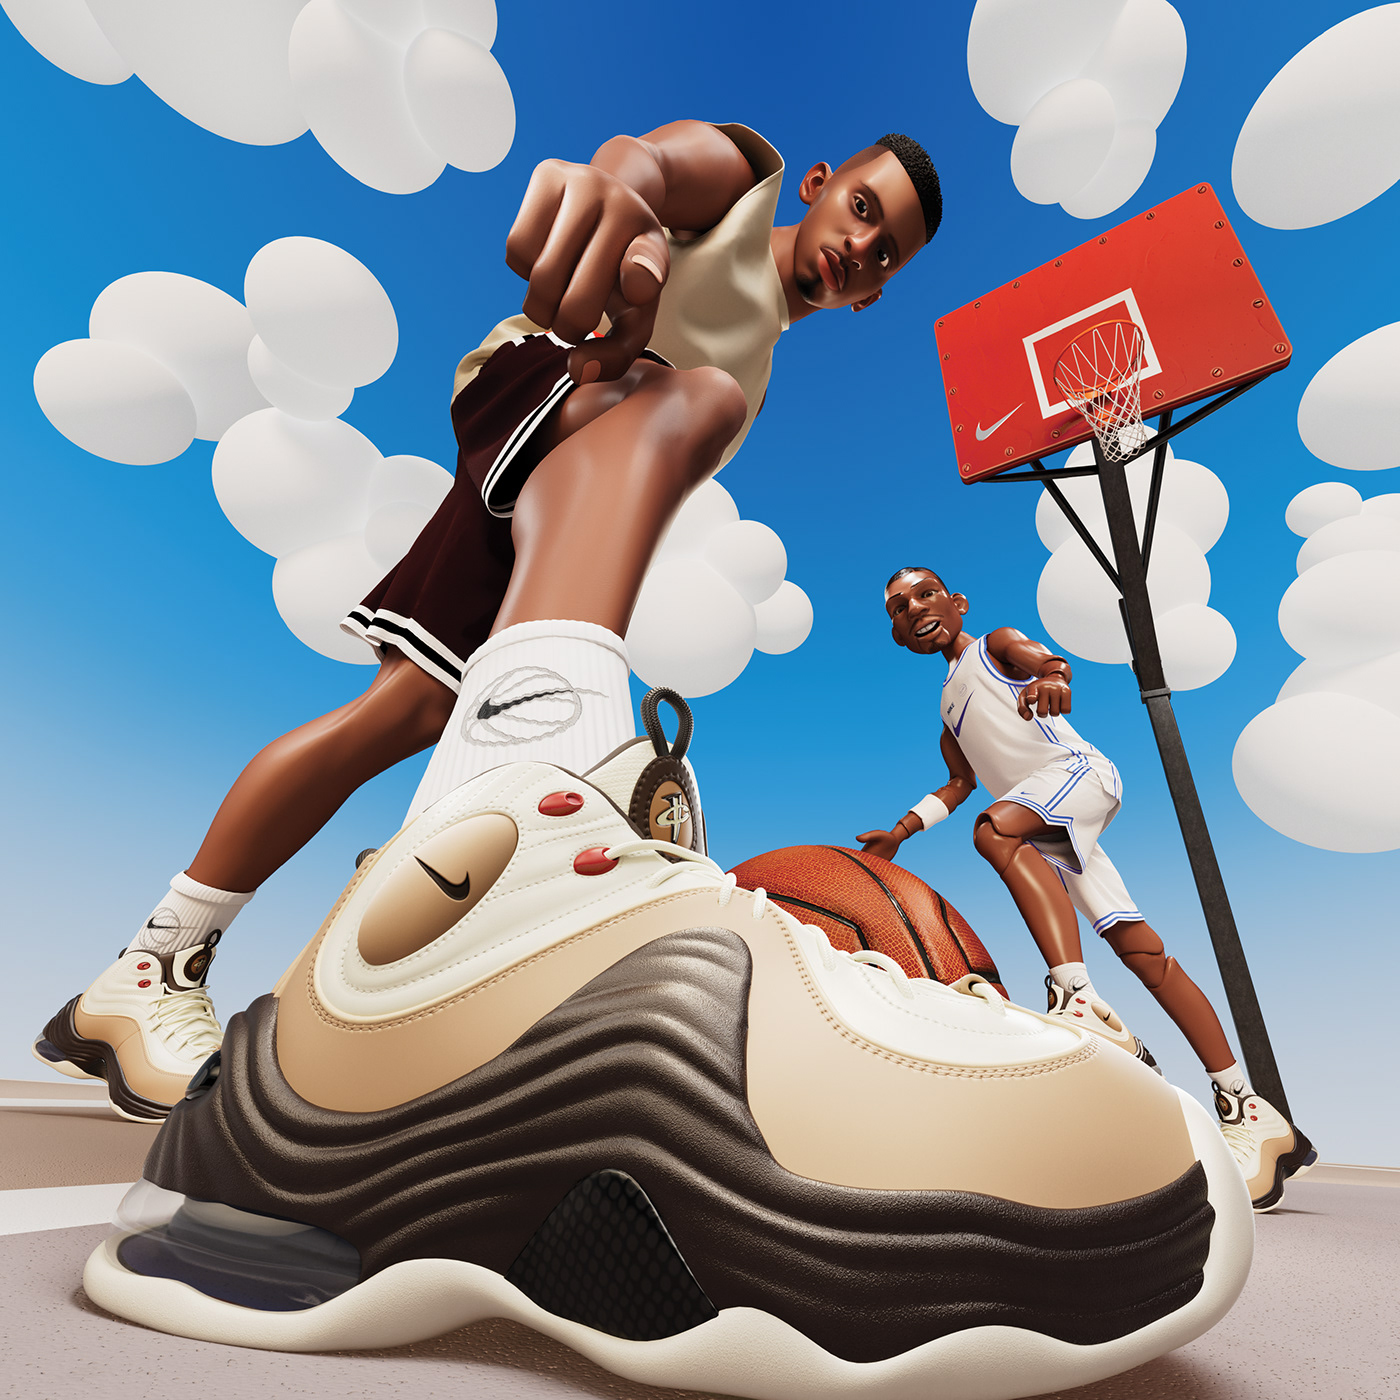 Nike 3D animation  social media character animation sneakers nike air Advertising 